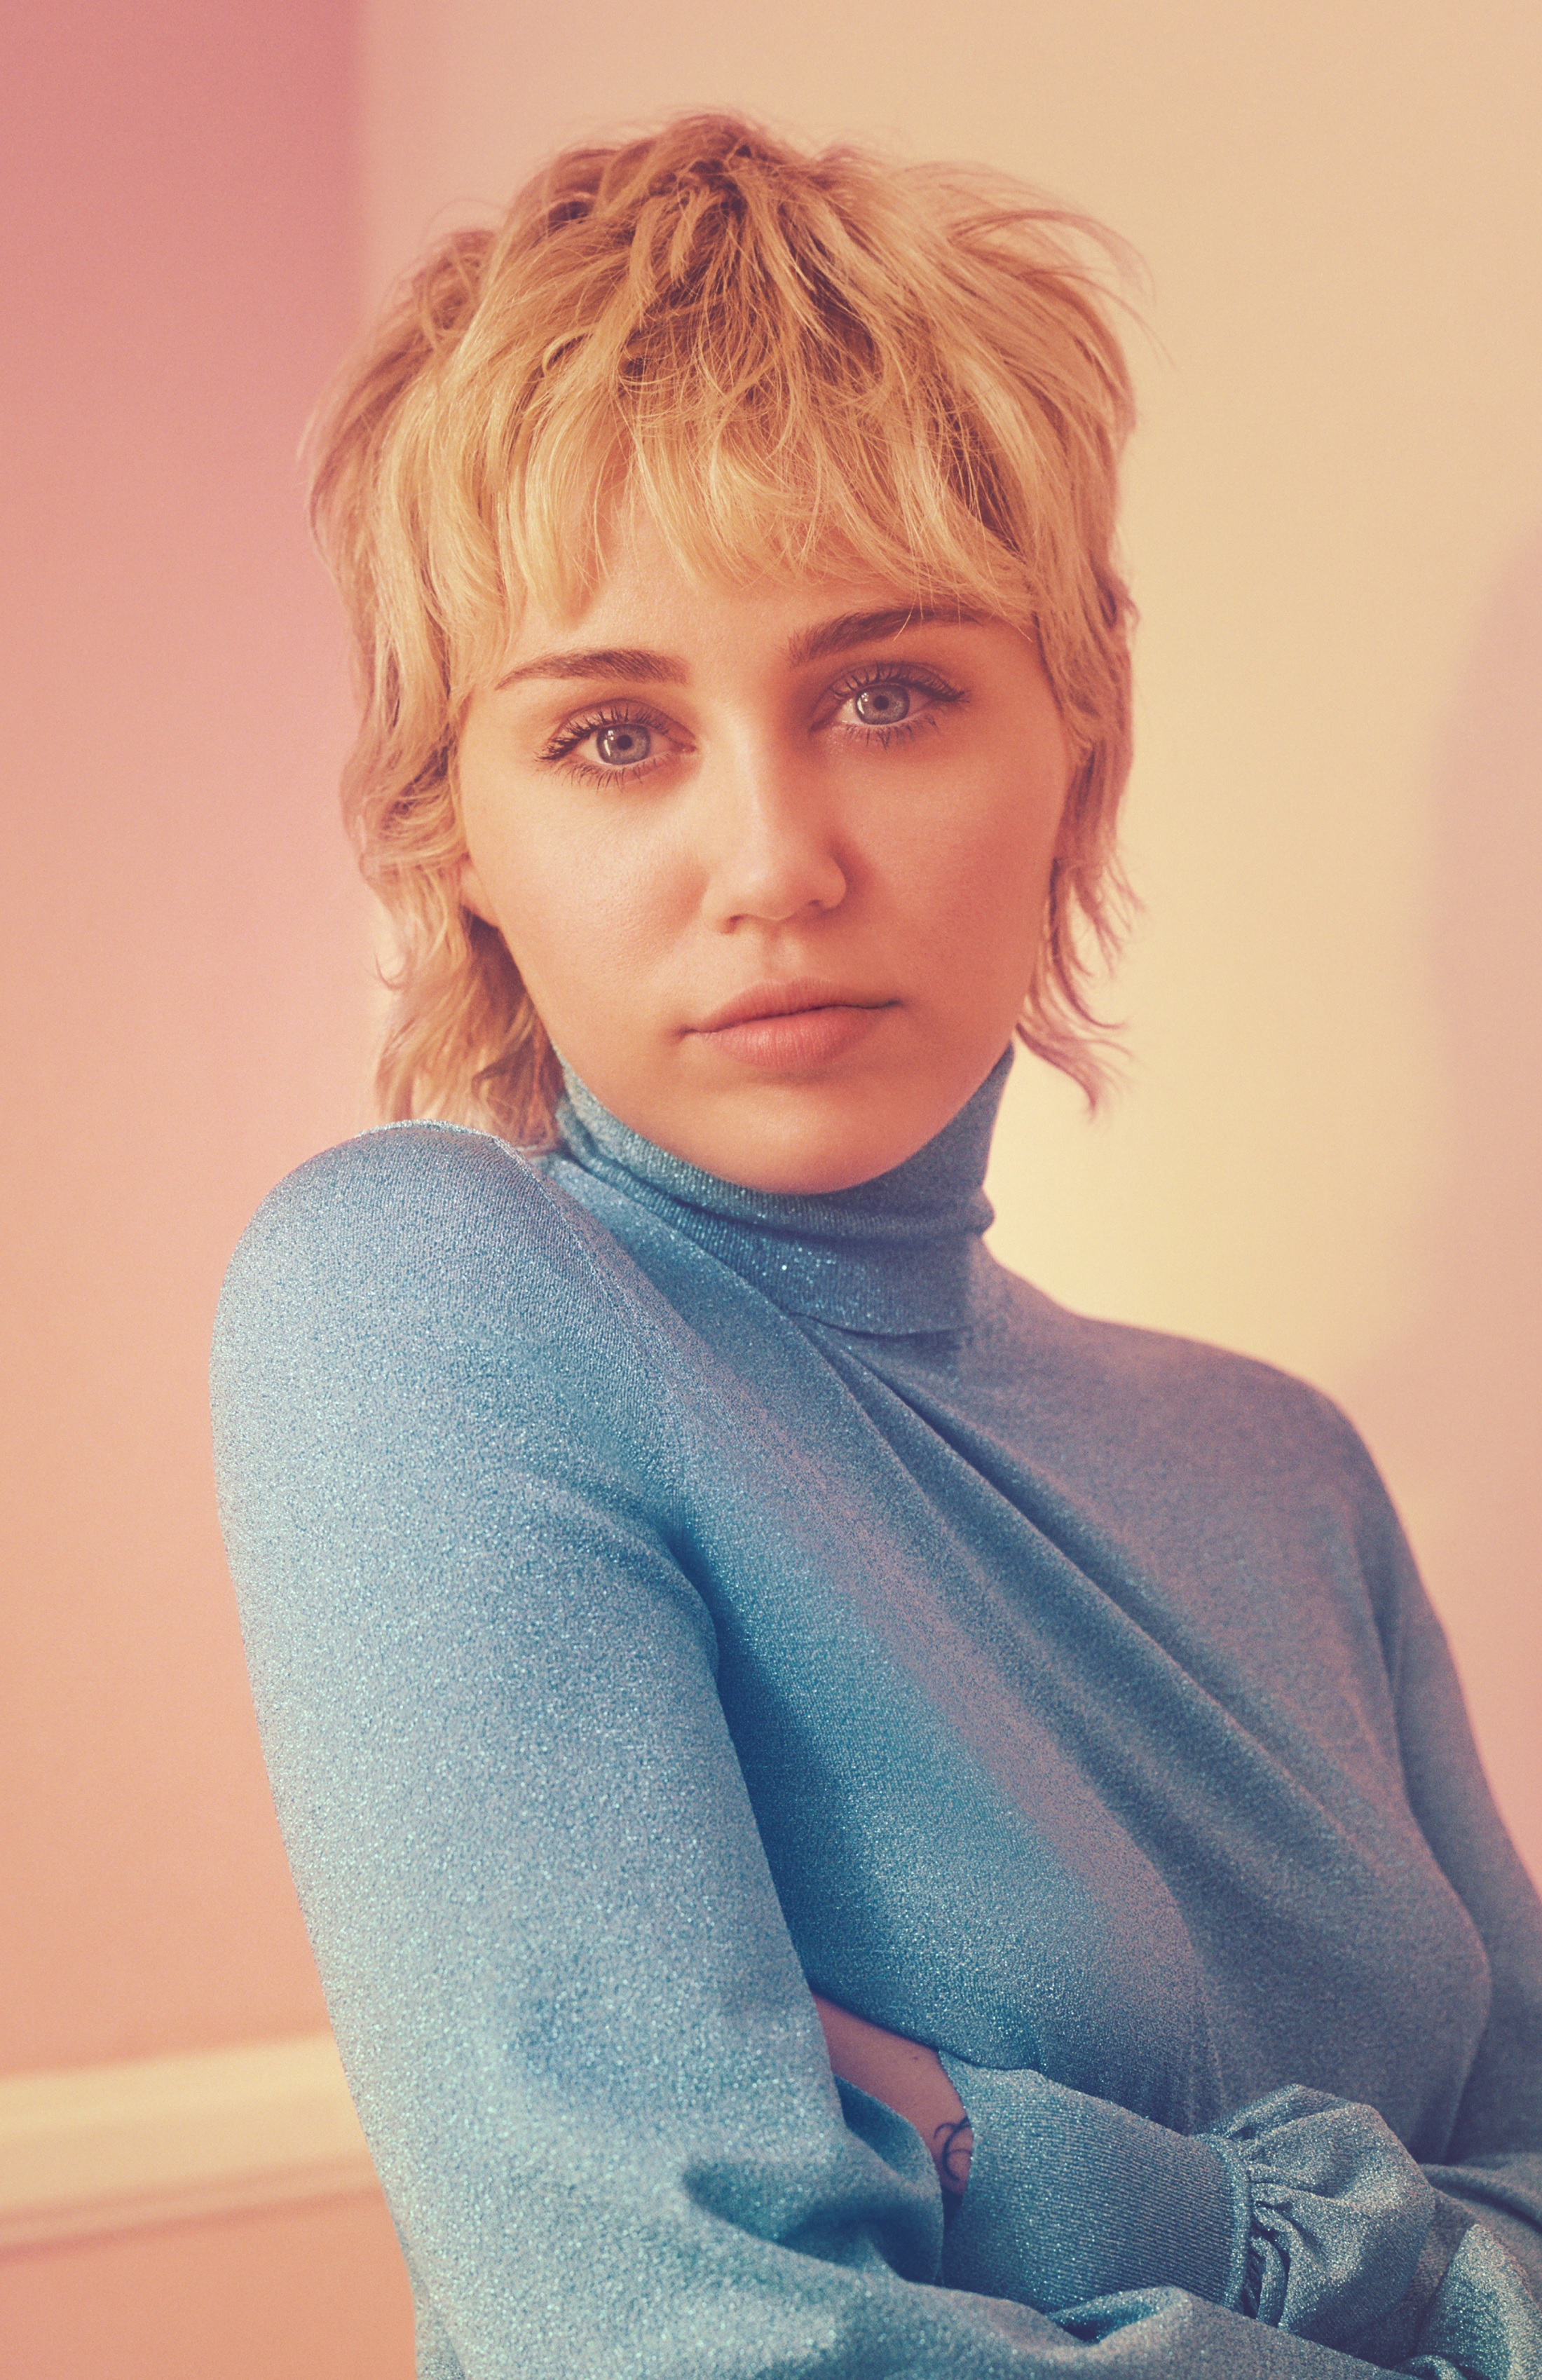 Miley Cyrus as the New Face of Gucci Flora Gardenia New Fragrances